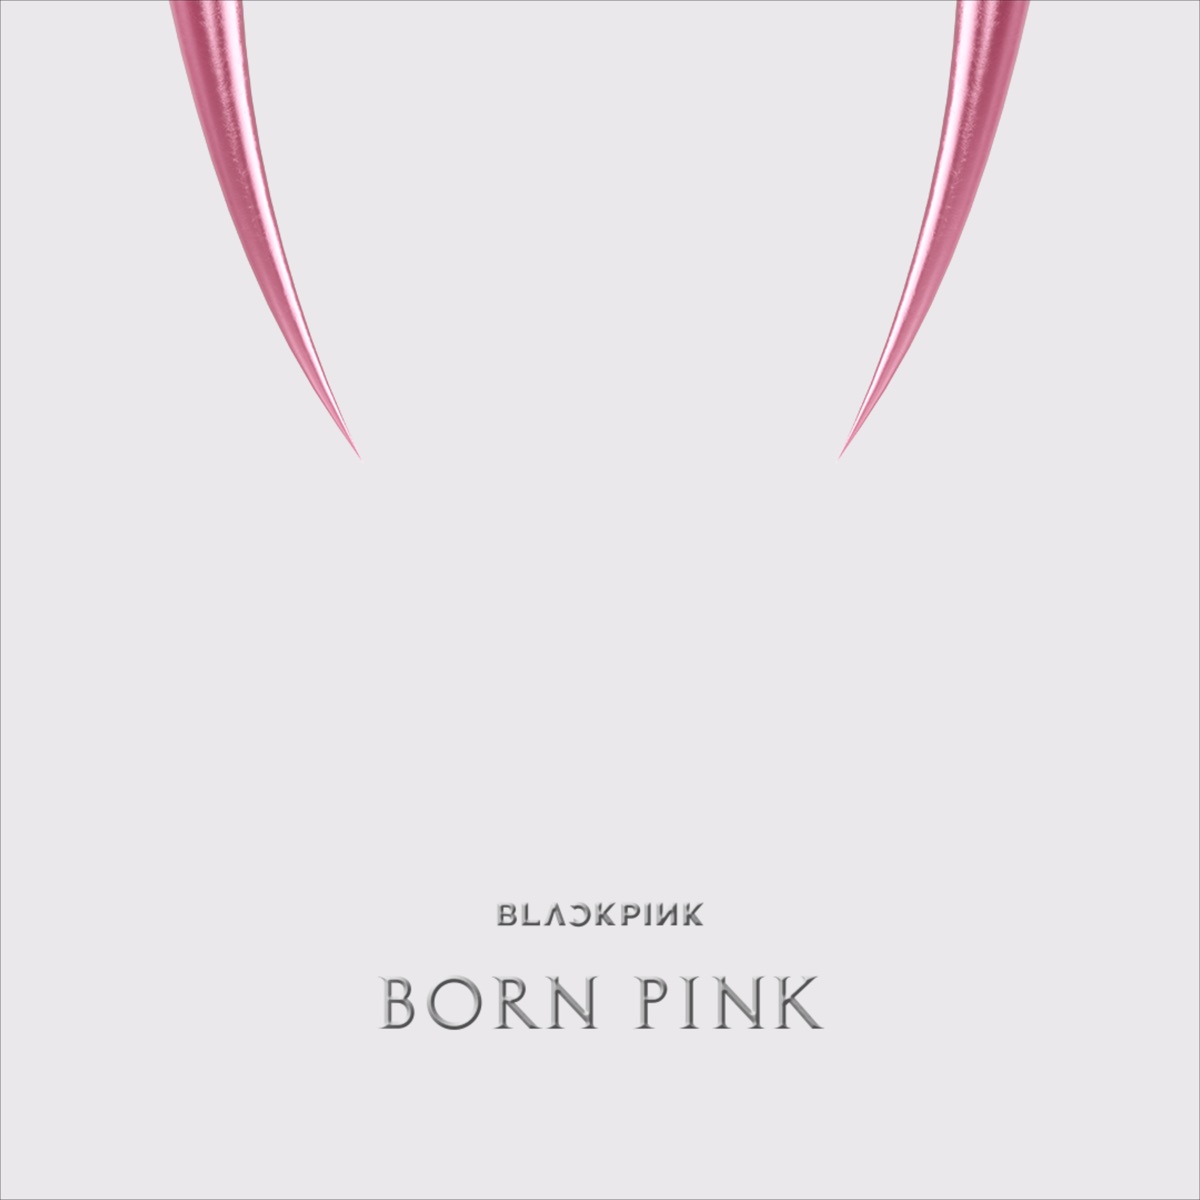 Cover art for『BLACKPINK - Typa Girl』from the release『BORN PINK